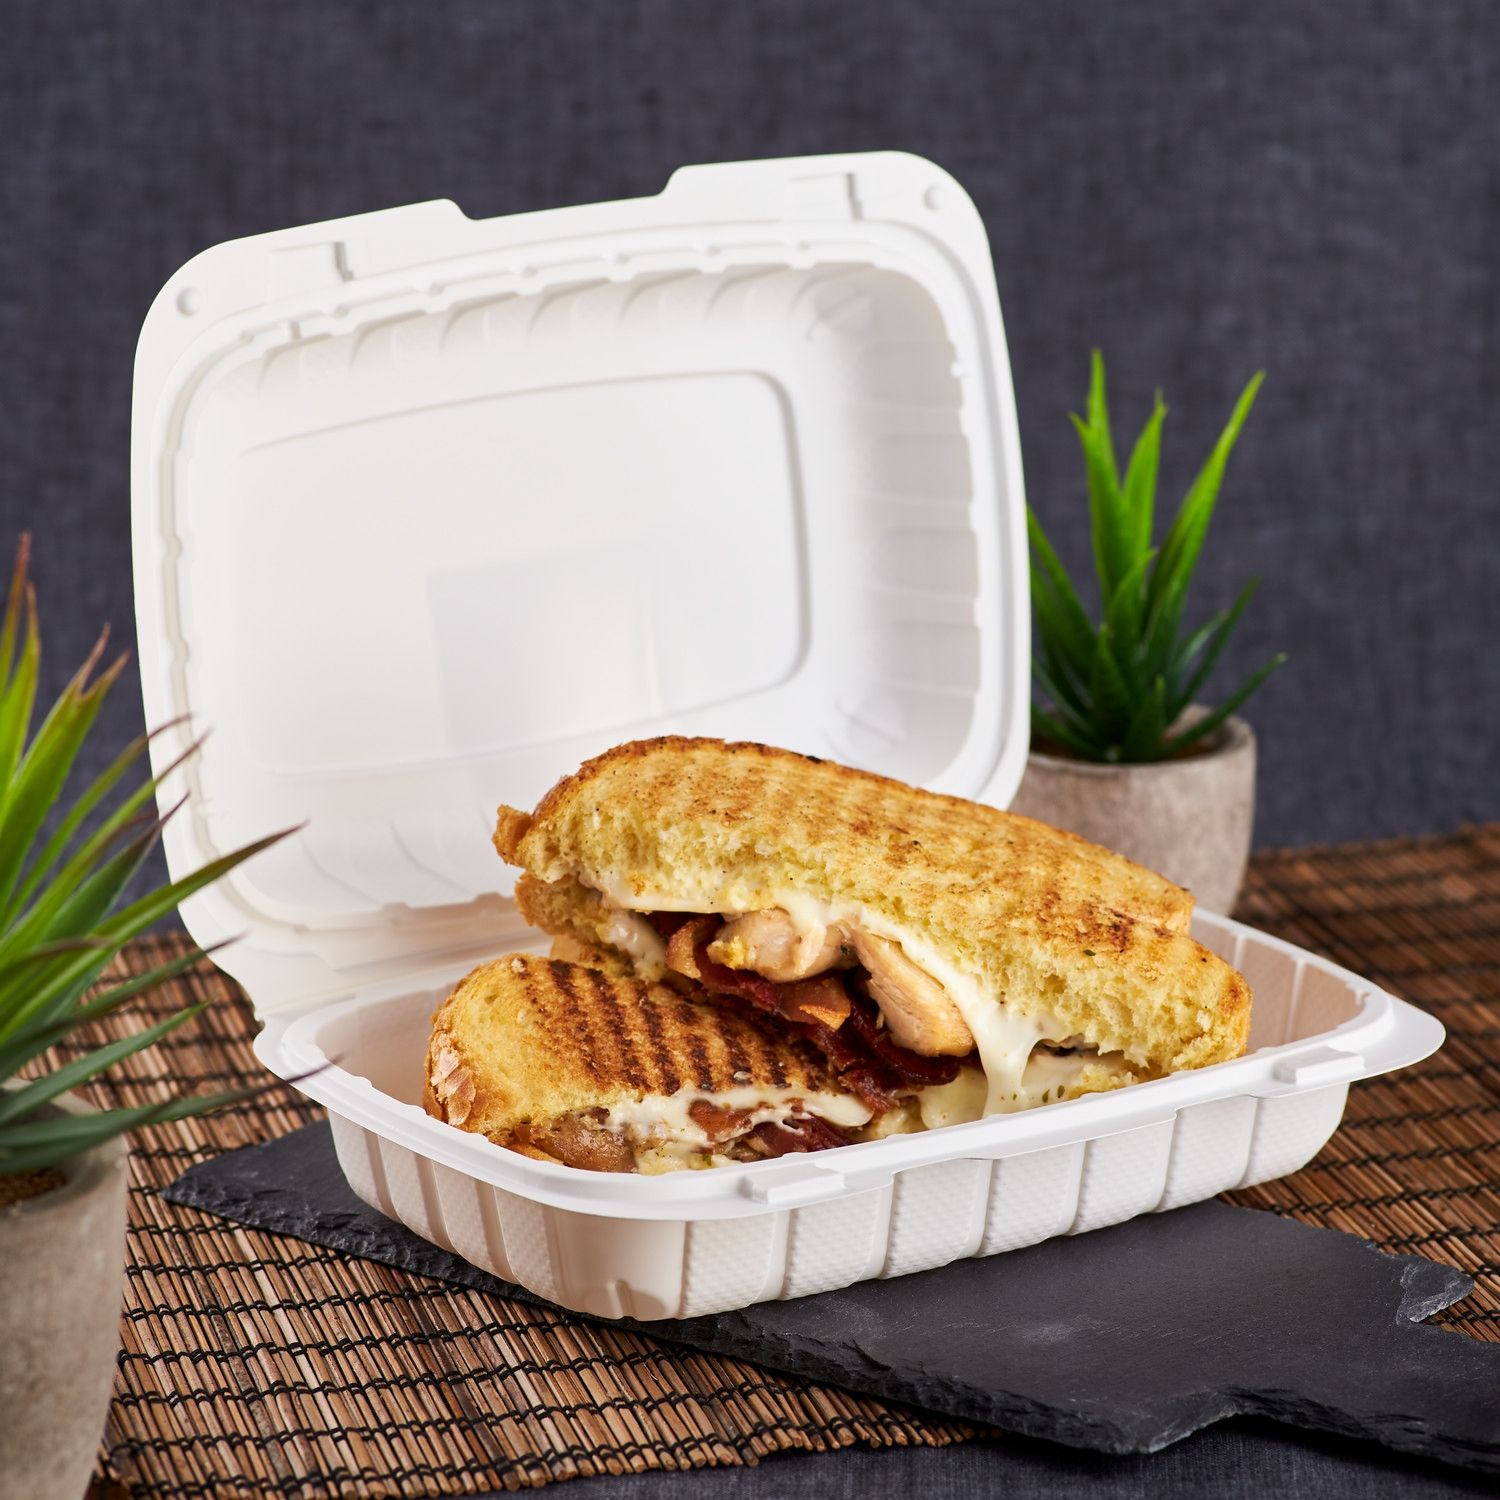 Medium Clamshell Takeout Containers - Karat 7x7 Hinged Boxes